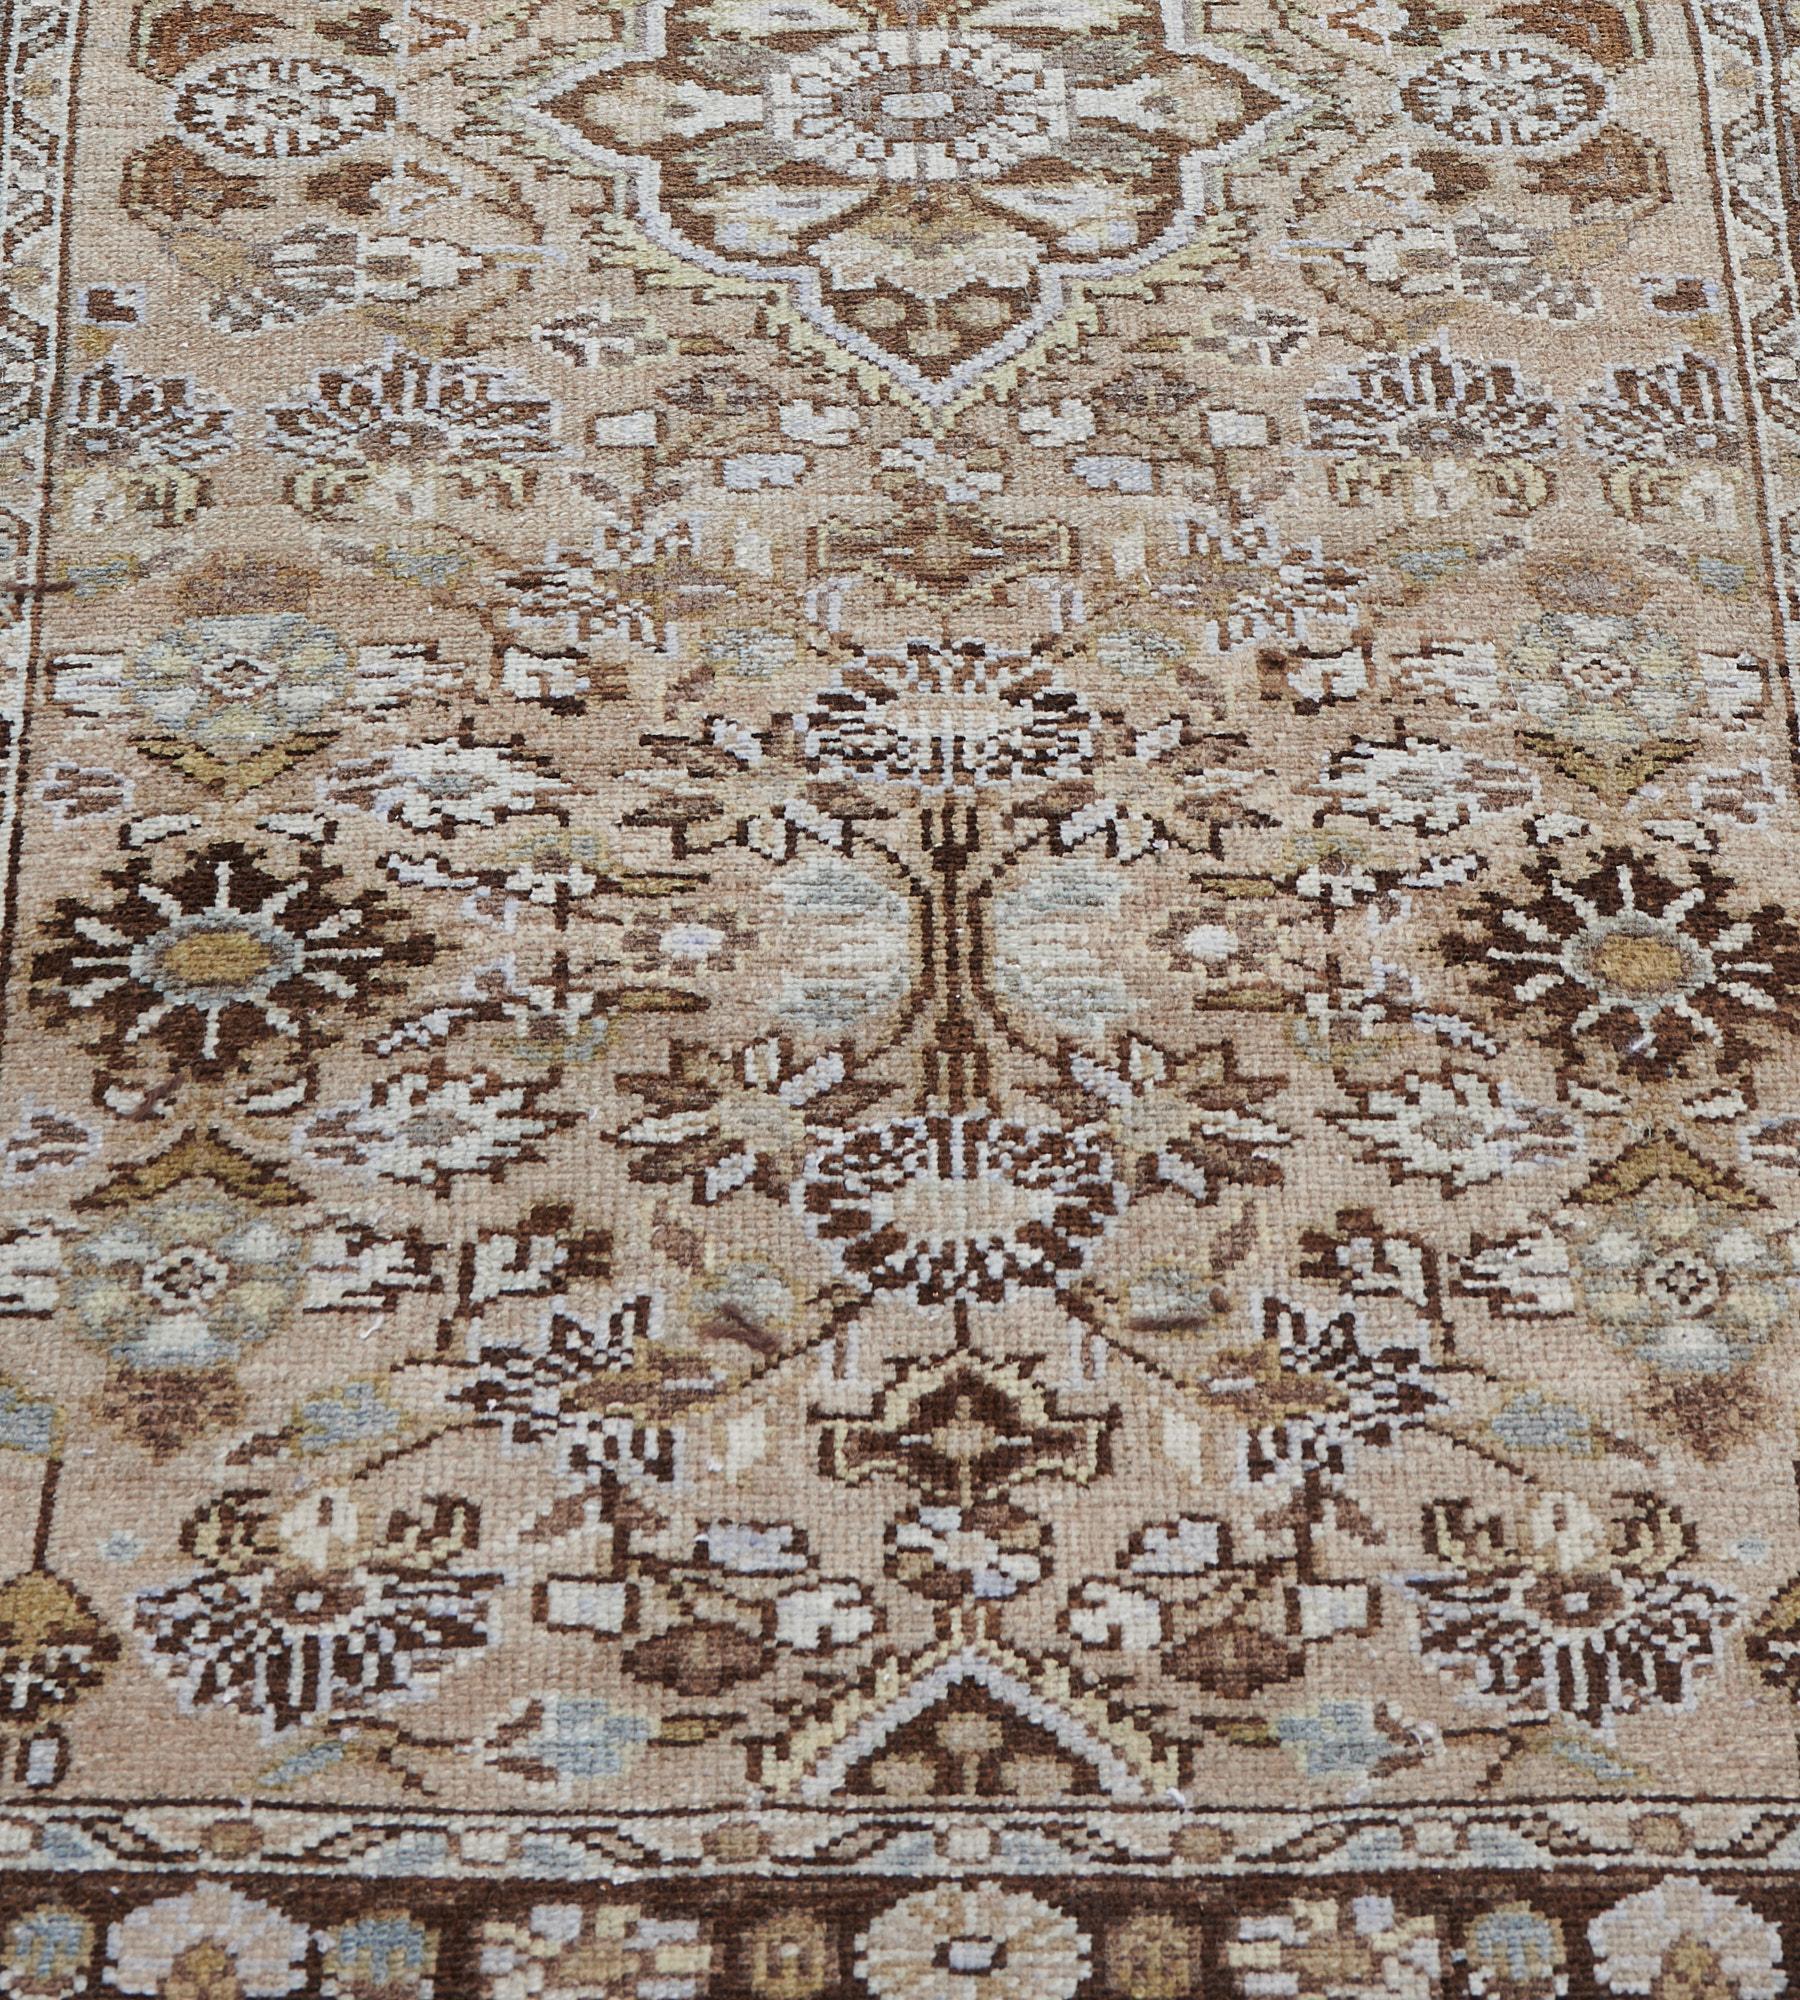 This antique Malayer runner has a buff-brown field with a column of mole-brown cusped medallions each containing a central rosette and floral sprays, surrounded by a dense mole-brown, fox-brown, pistachio-green and ivory floral vine, in a mole-brown